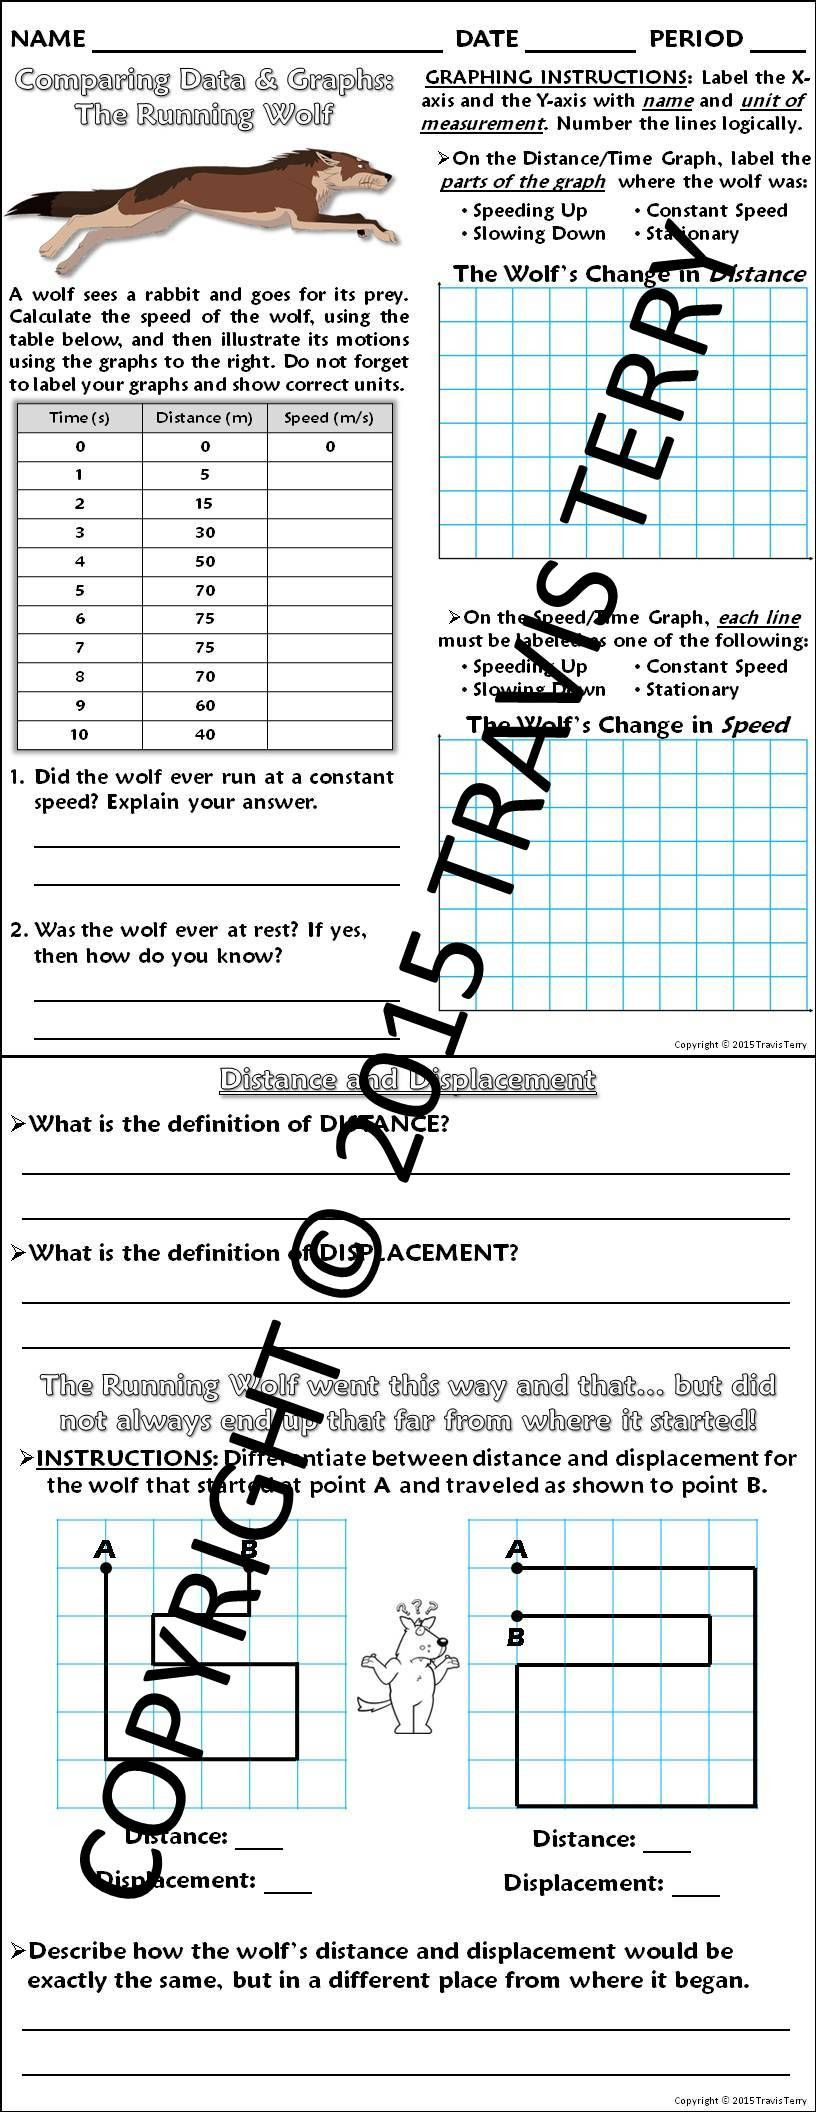 Distance Vs Displacement Worksheet Worksheet Graphing Distance and Displacement W the